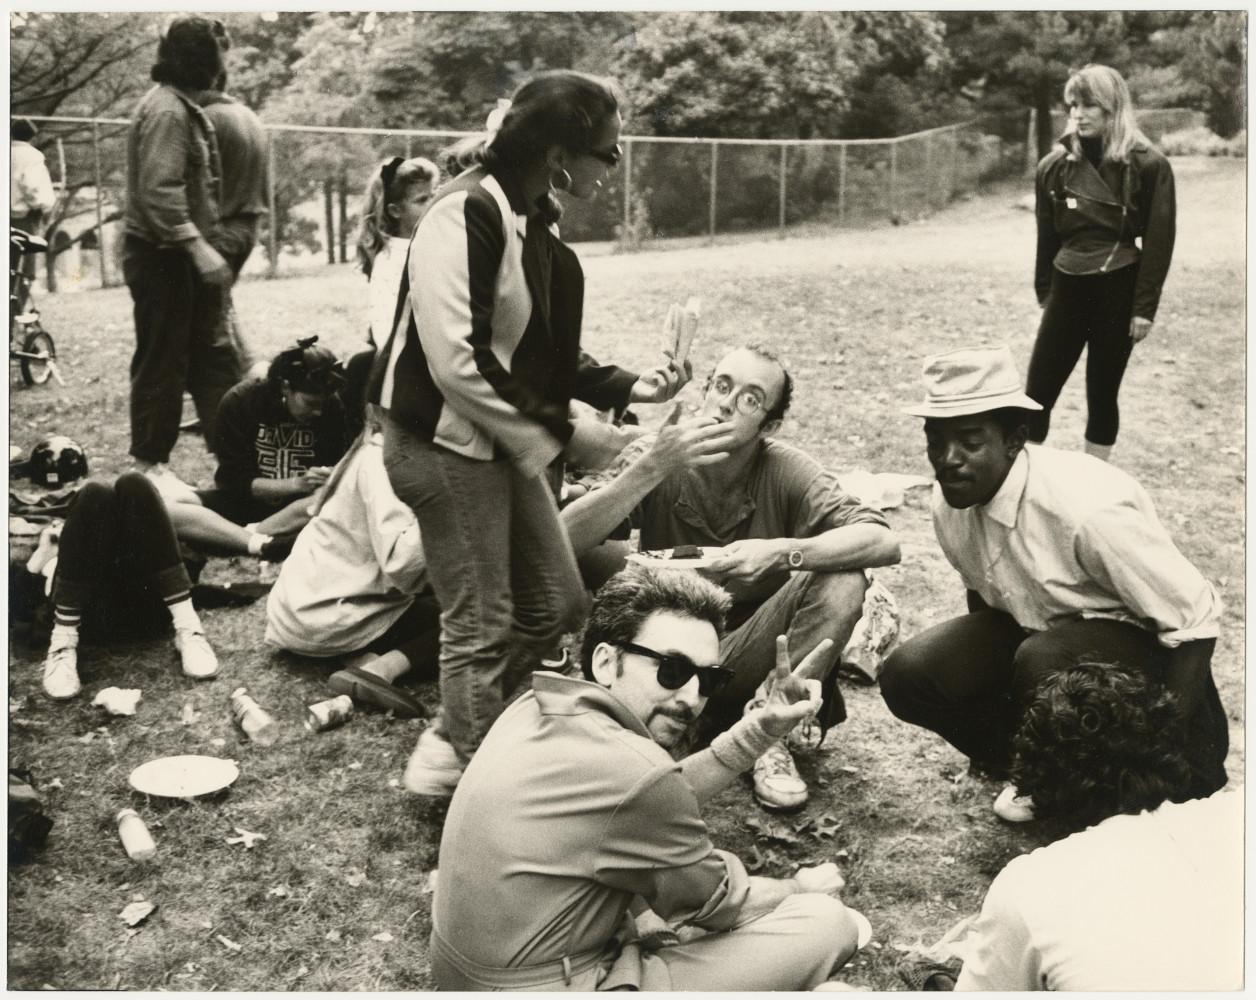 Portrait Photograph Andy Warhol - Keith Haring in Park with Friends - Amicaux